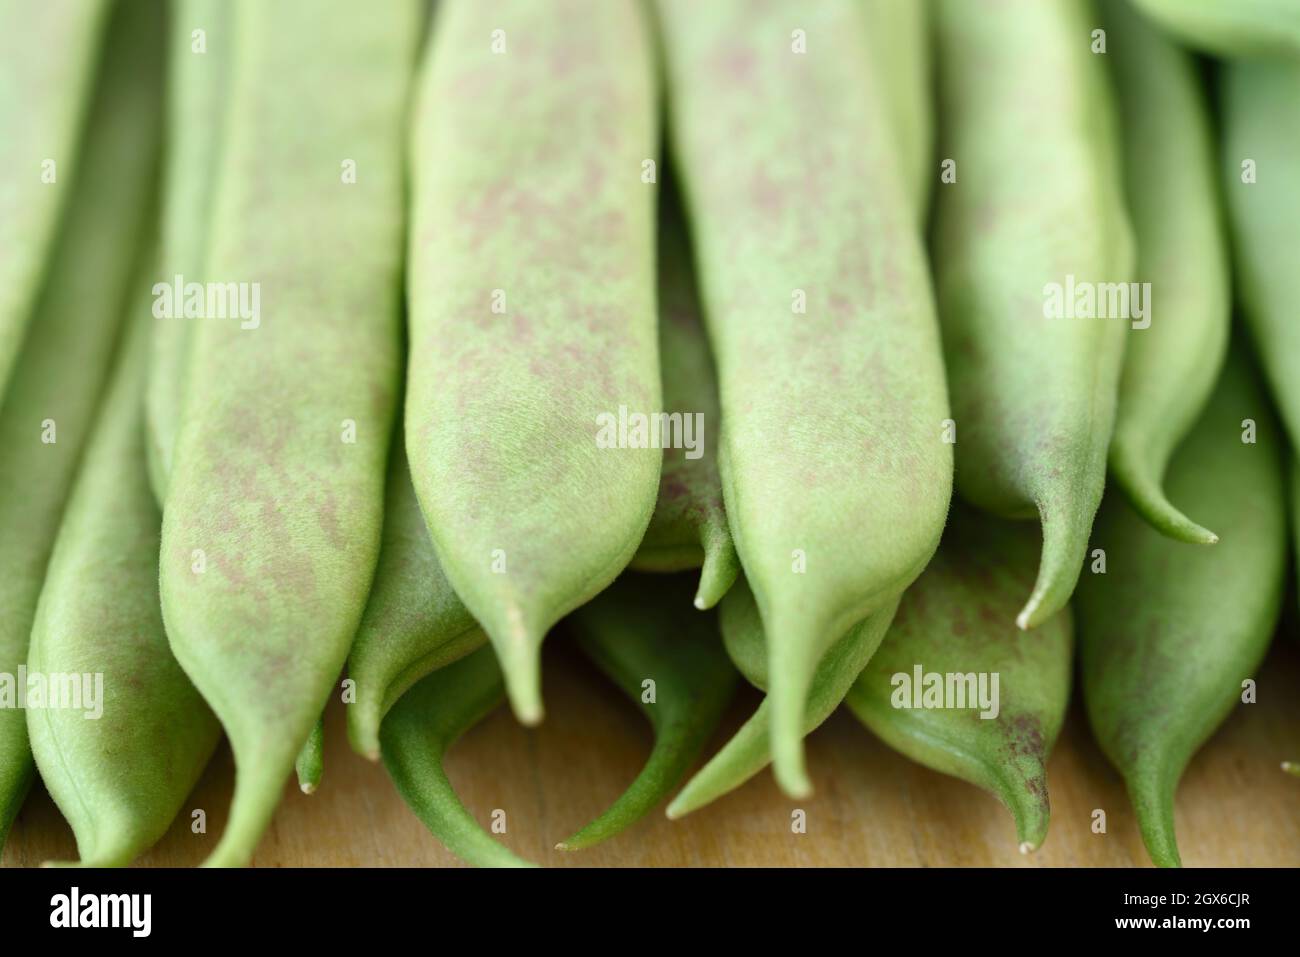 Phaseolus vulgaris  'Borlotto di Vigevano nano'  Dwarf French bean  Picked young pods to use whole as green beans  July Stock Photo